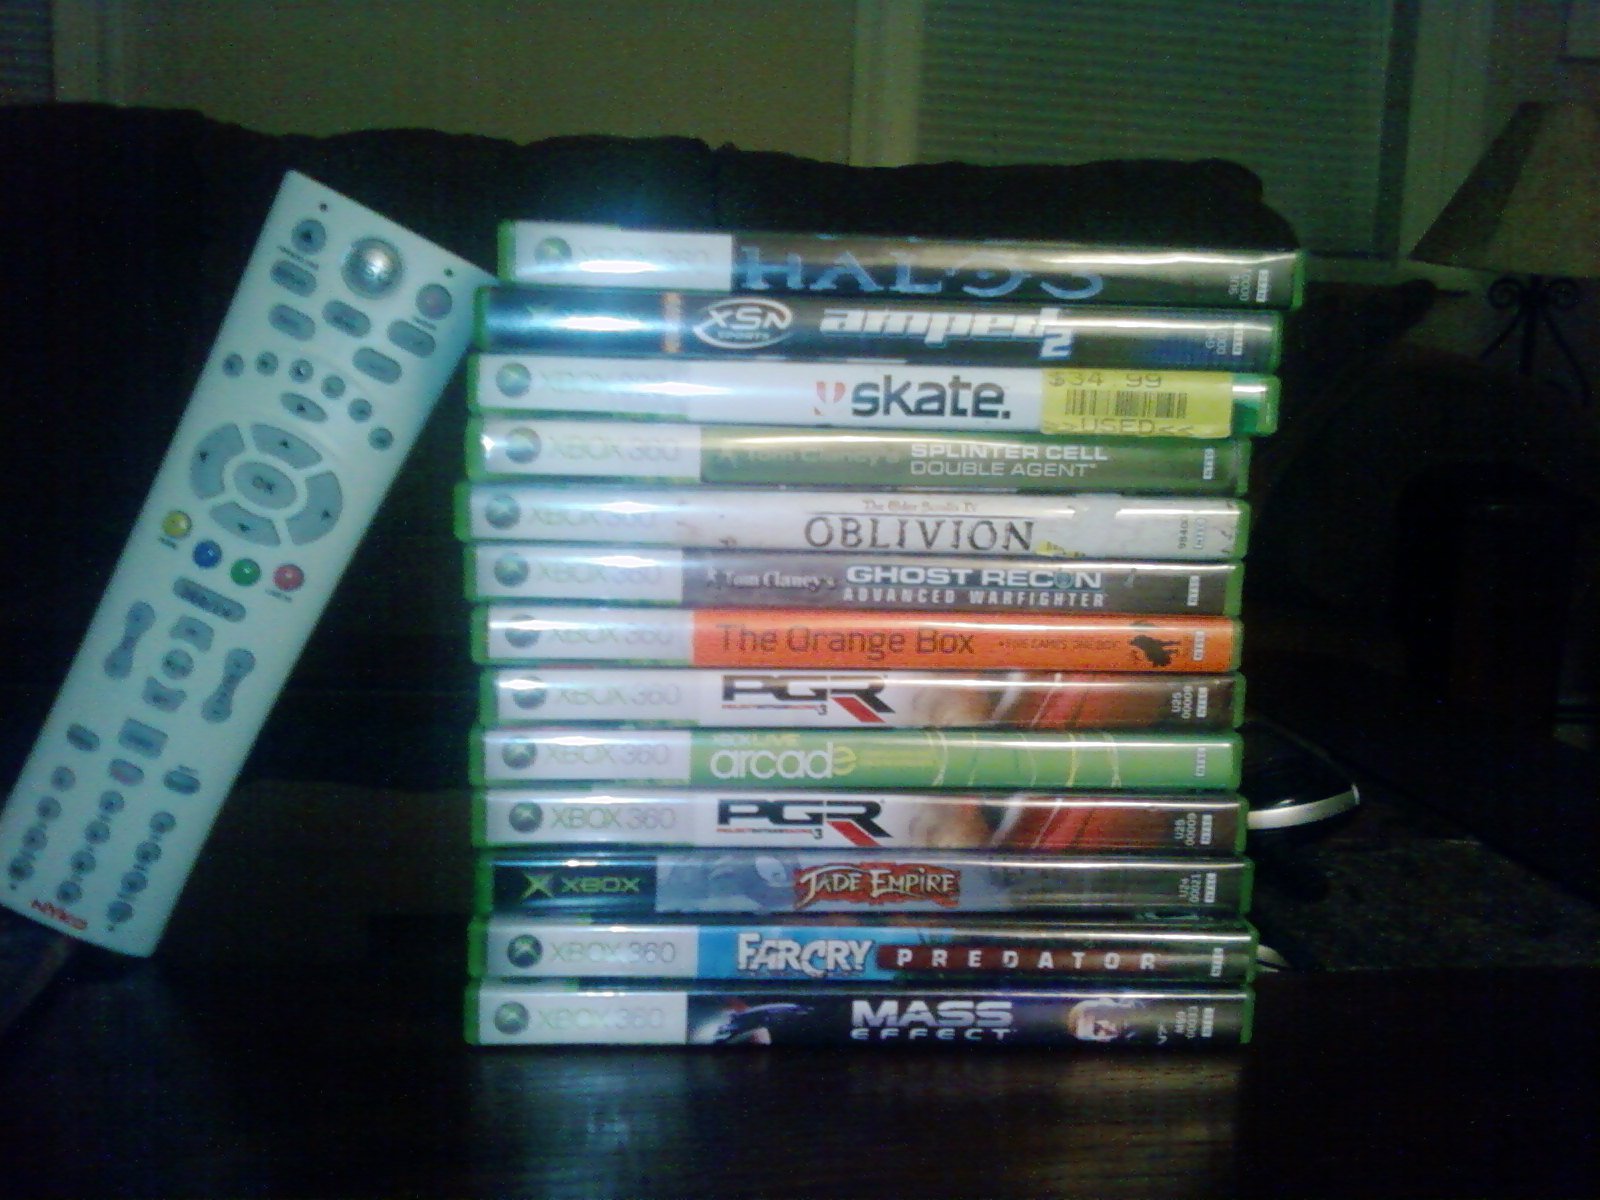 All the 360 games